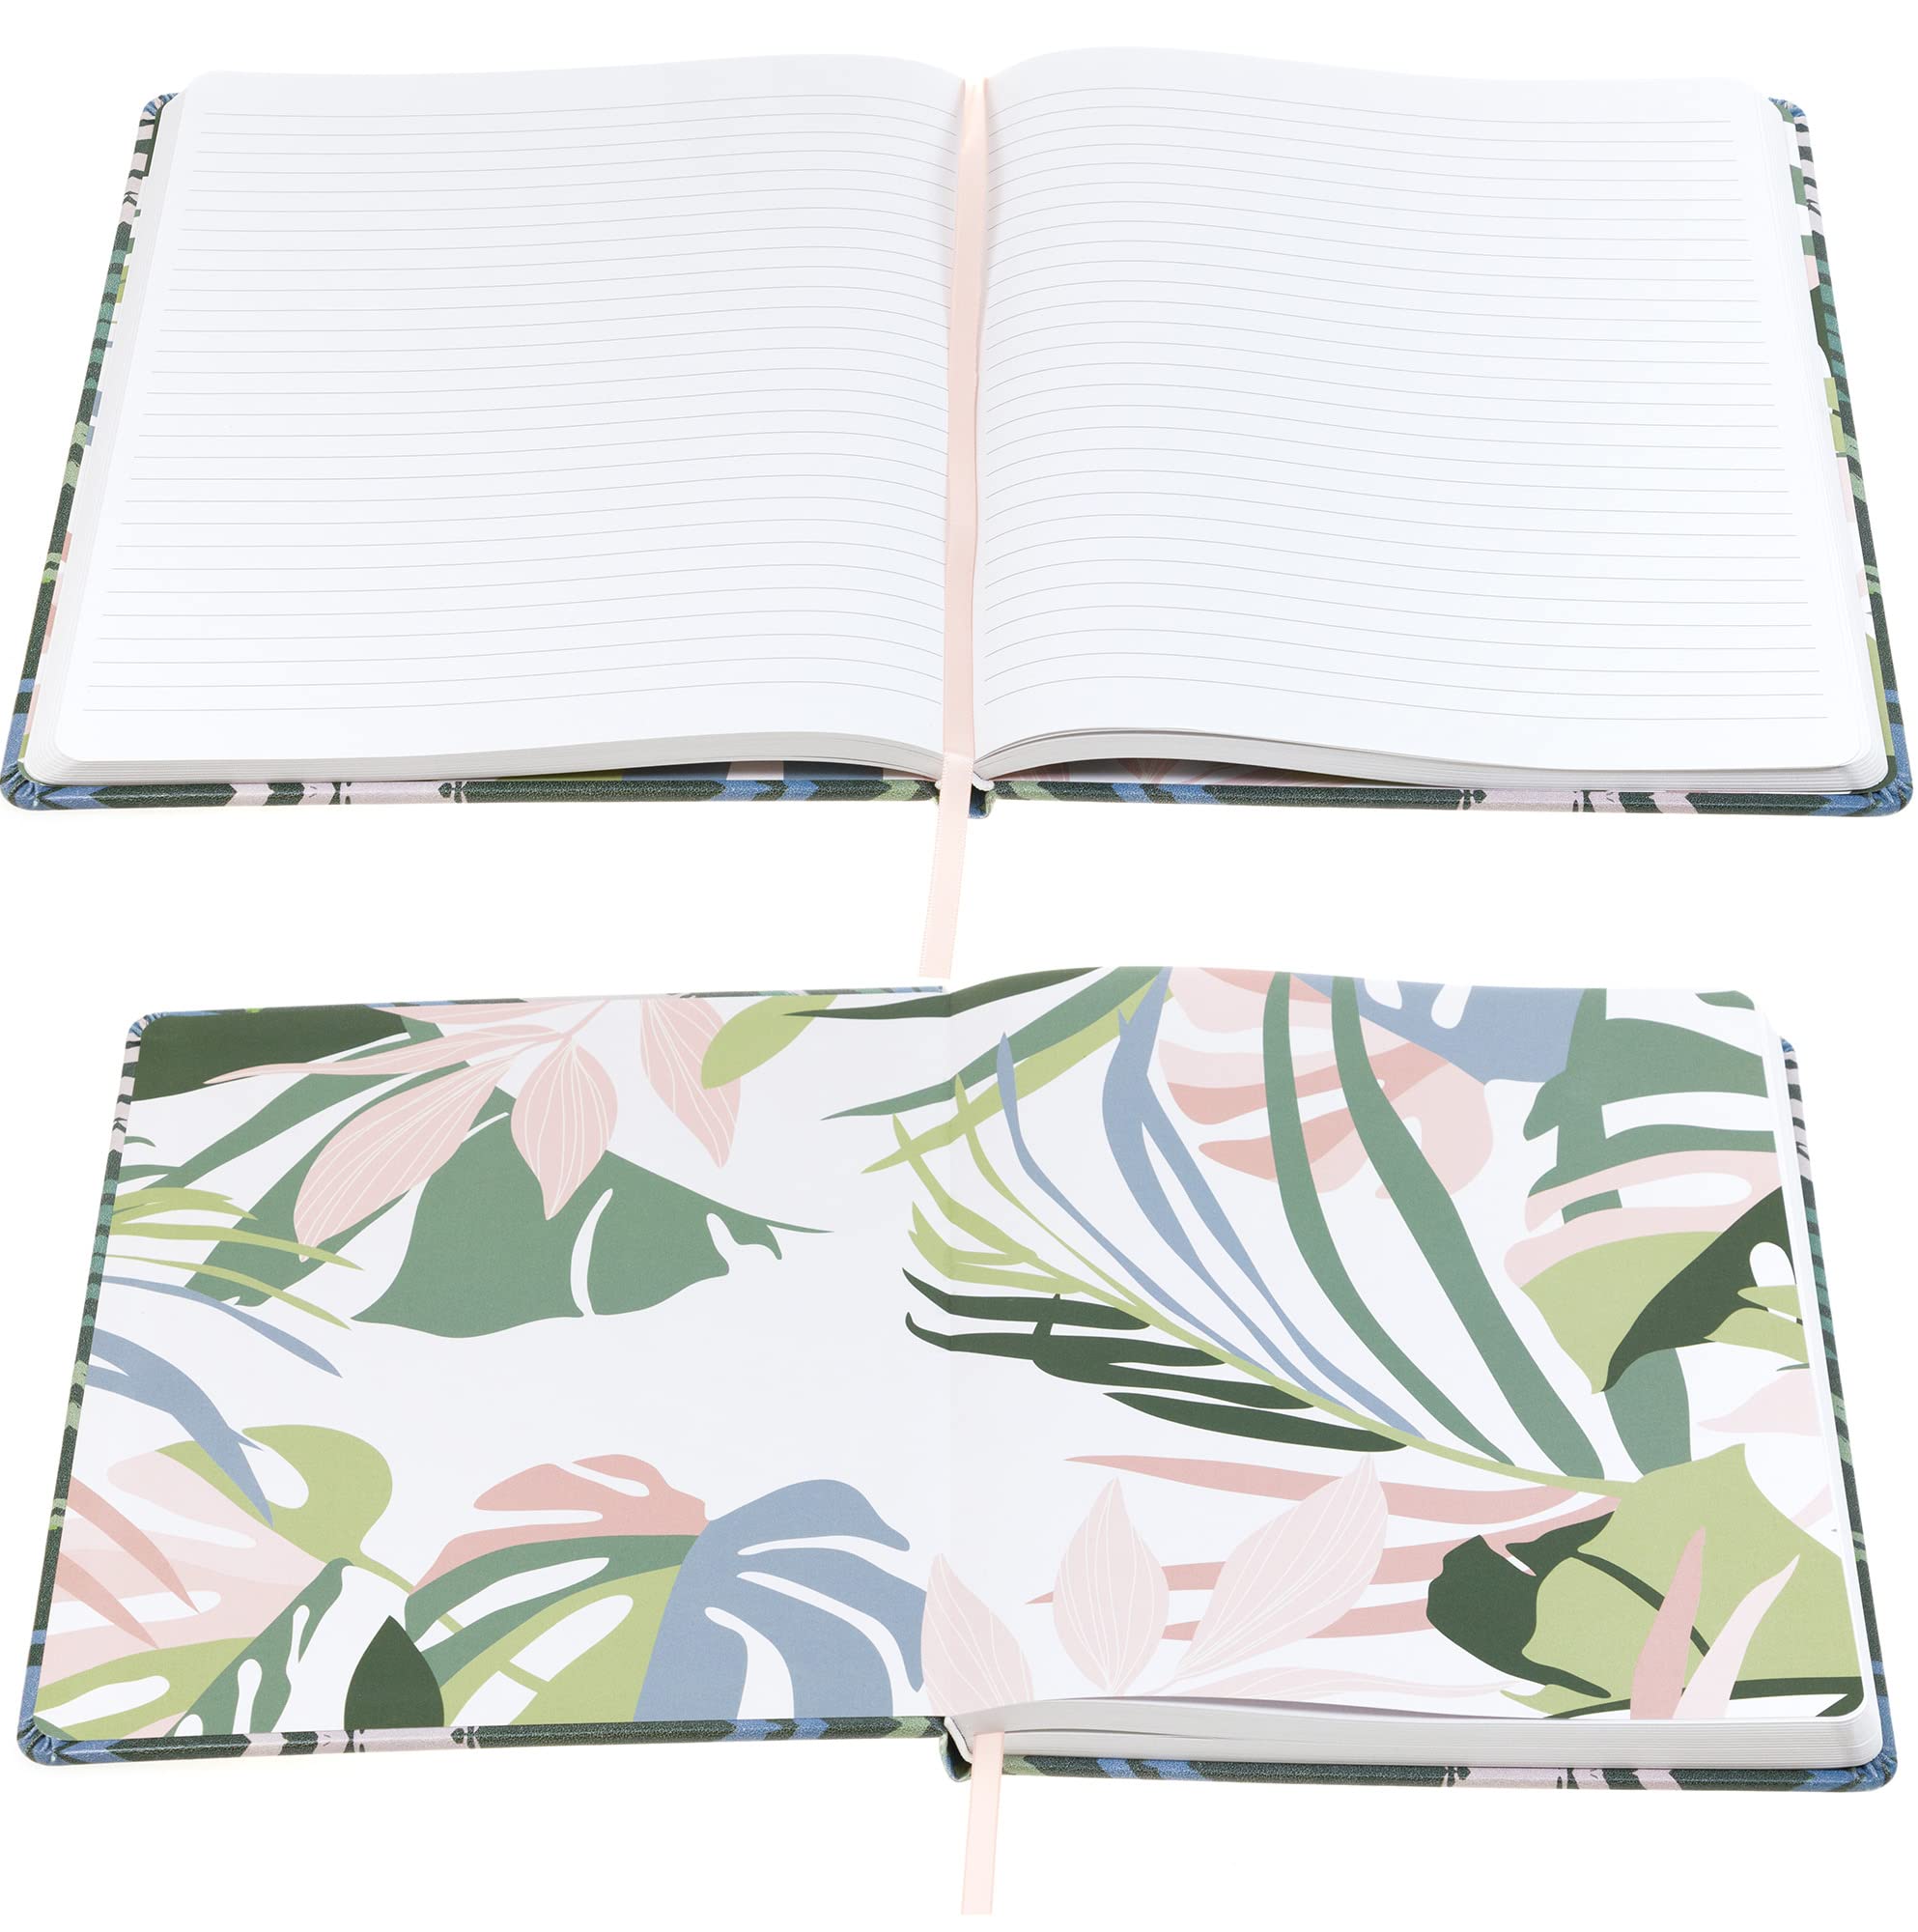 256 Ruled Pages Eco Friendly Notebook